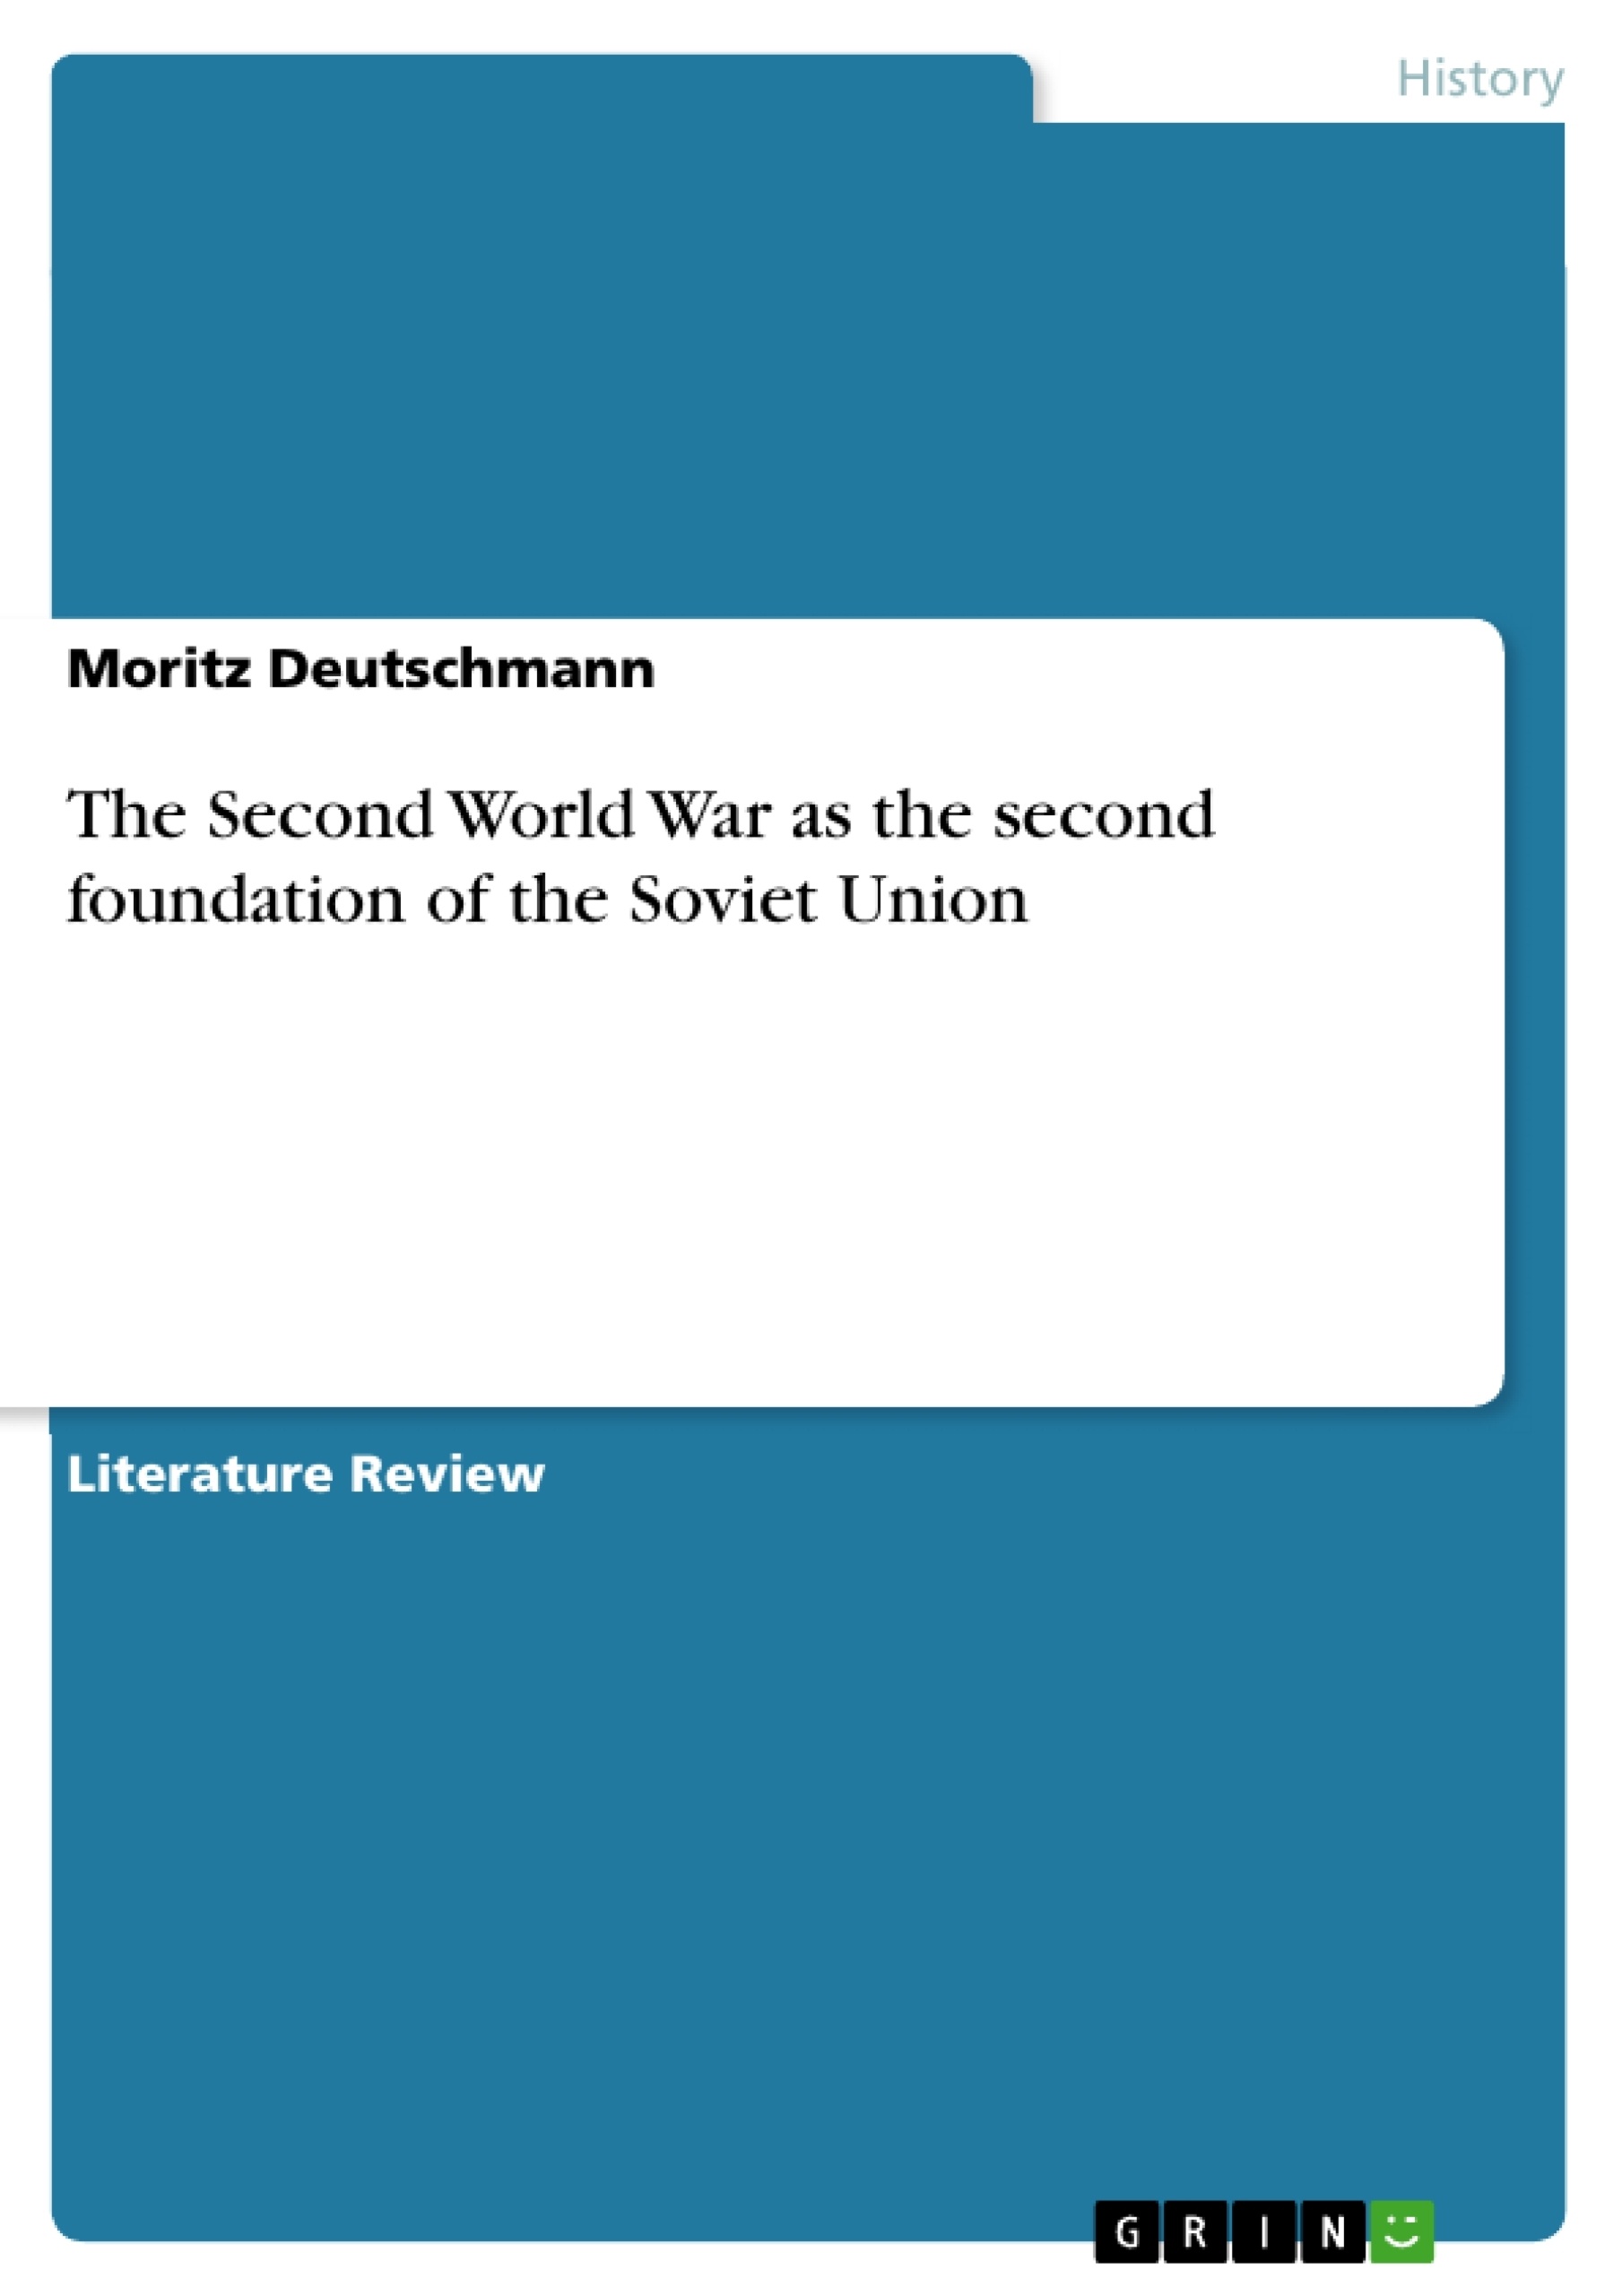 Titre: The Second World War as the second foundation of the Soviet Union